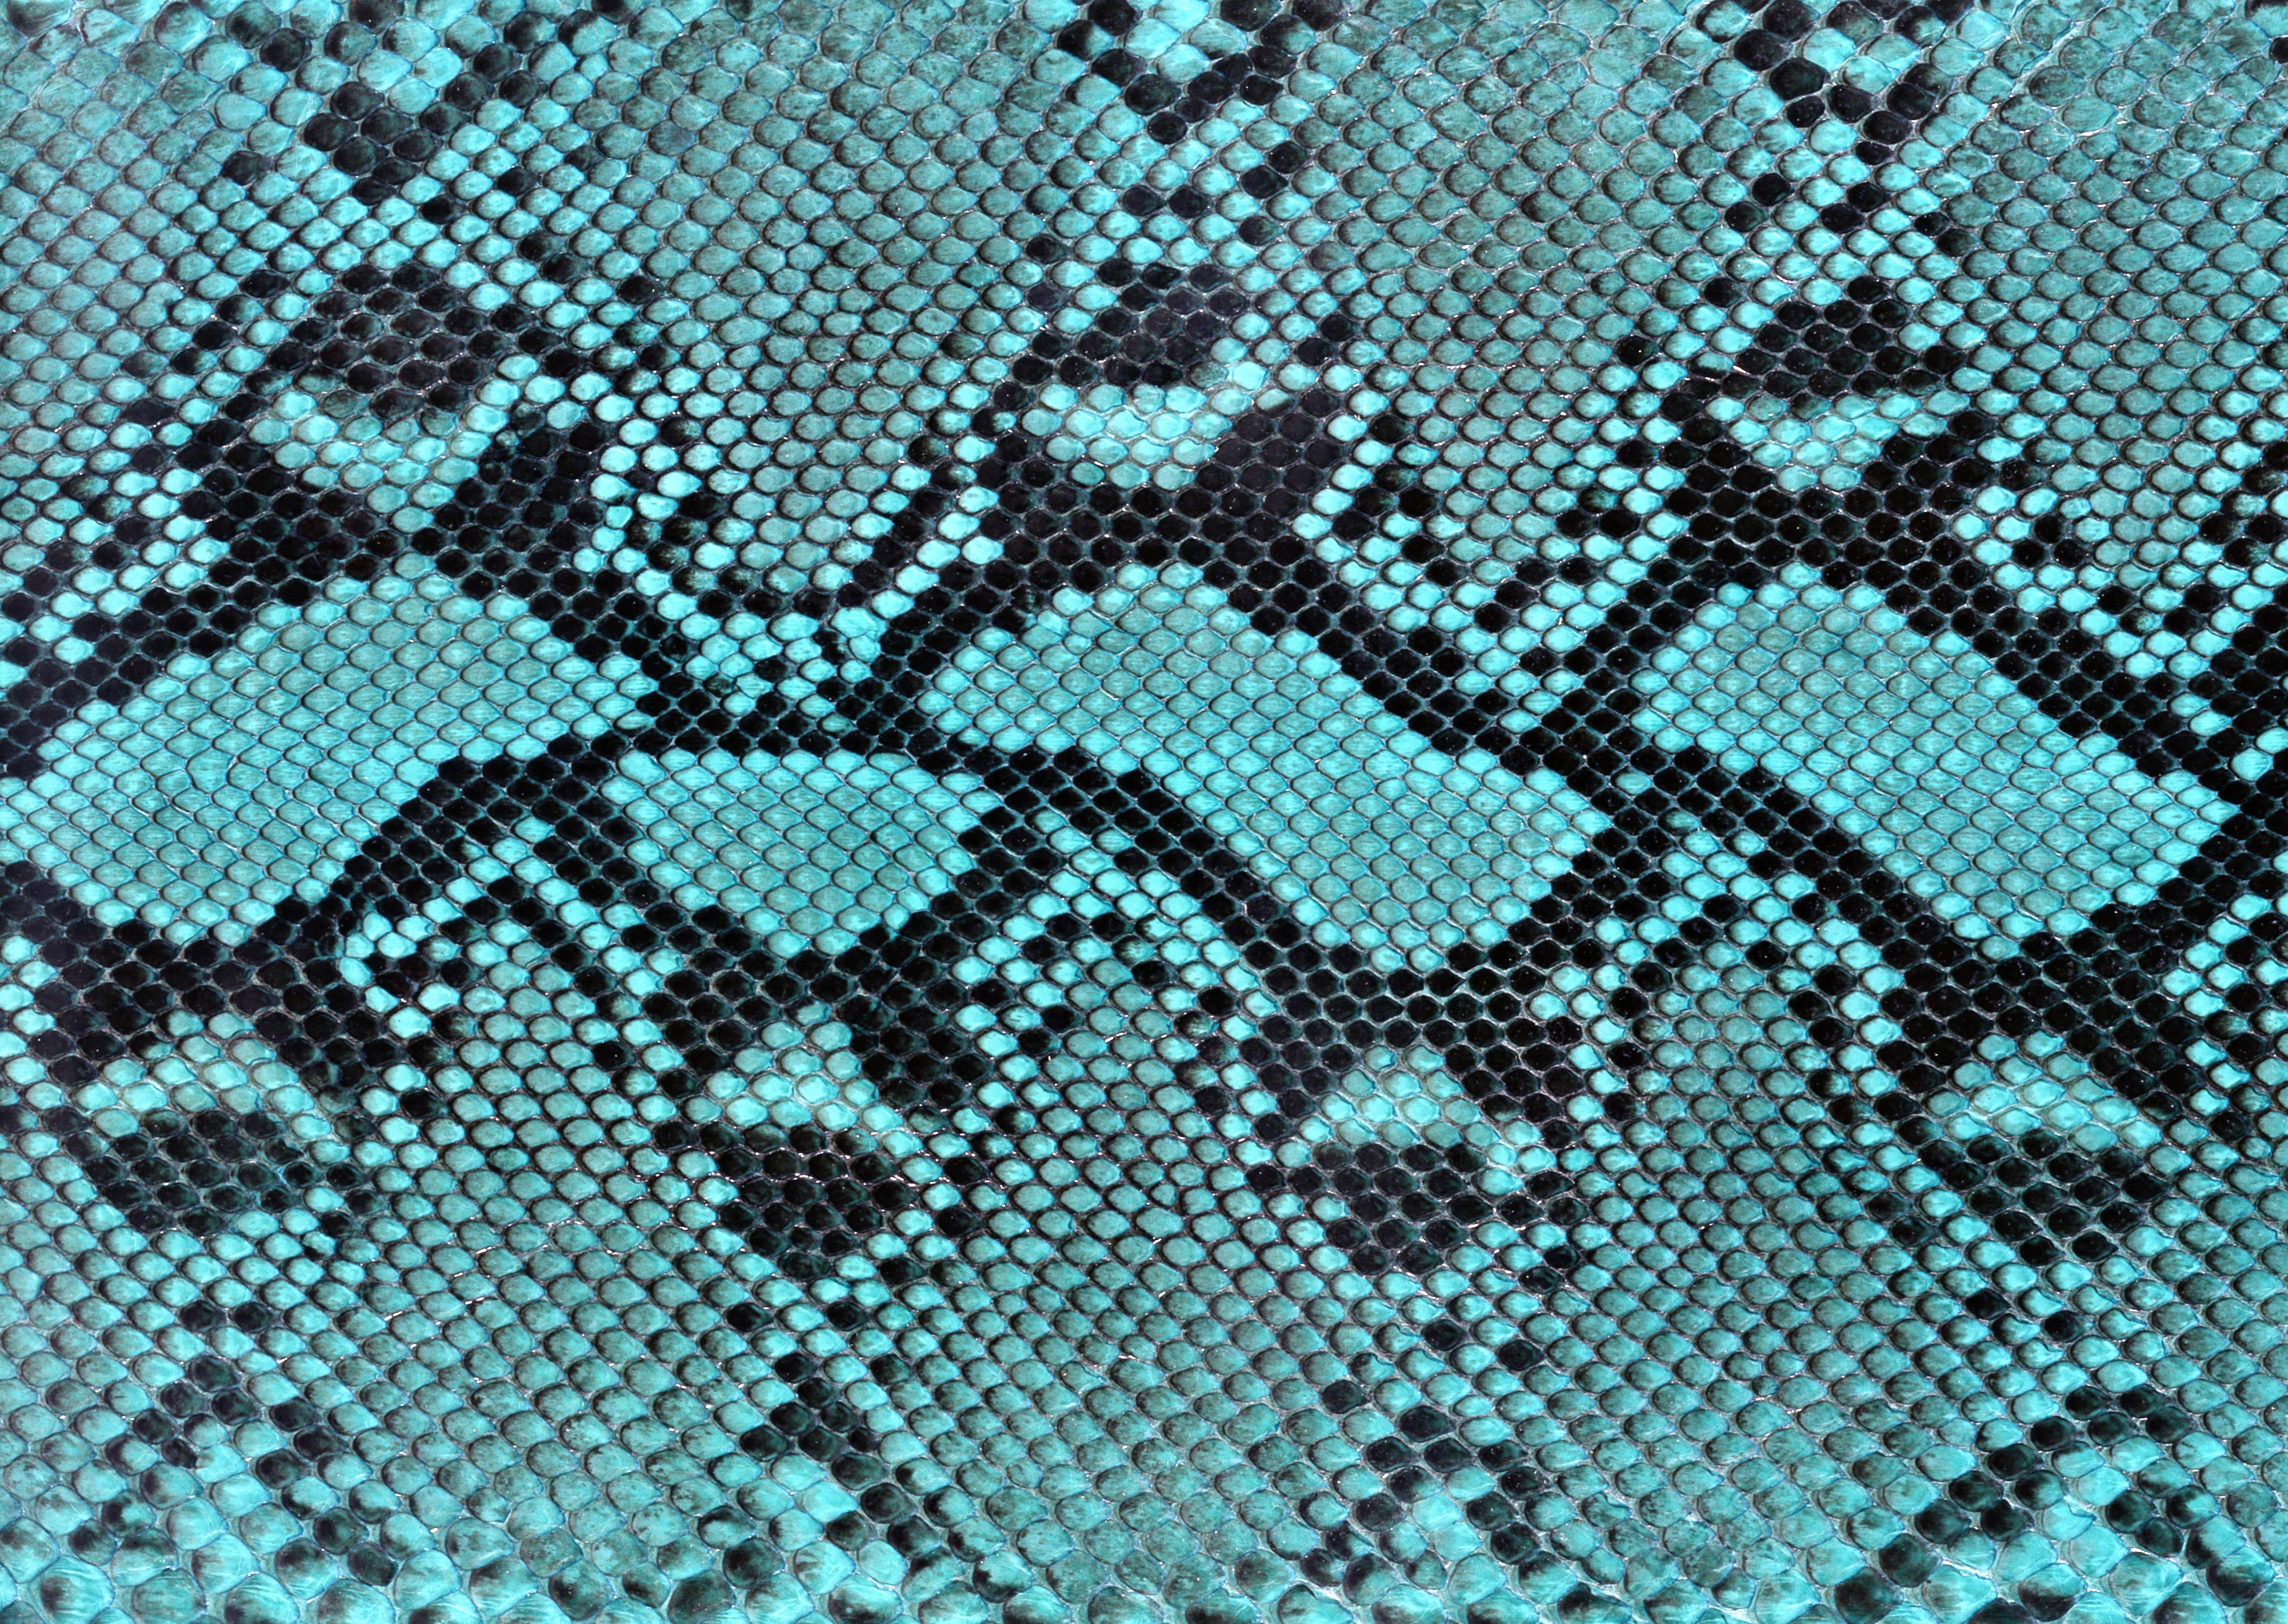 Snake leather texture background image